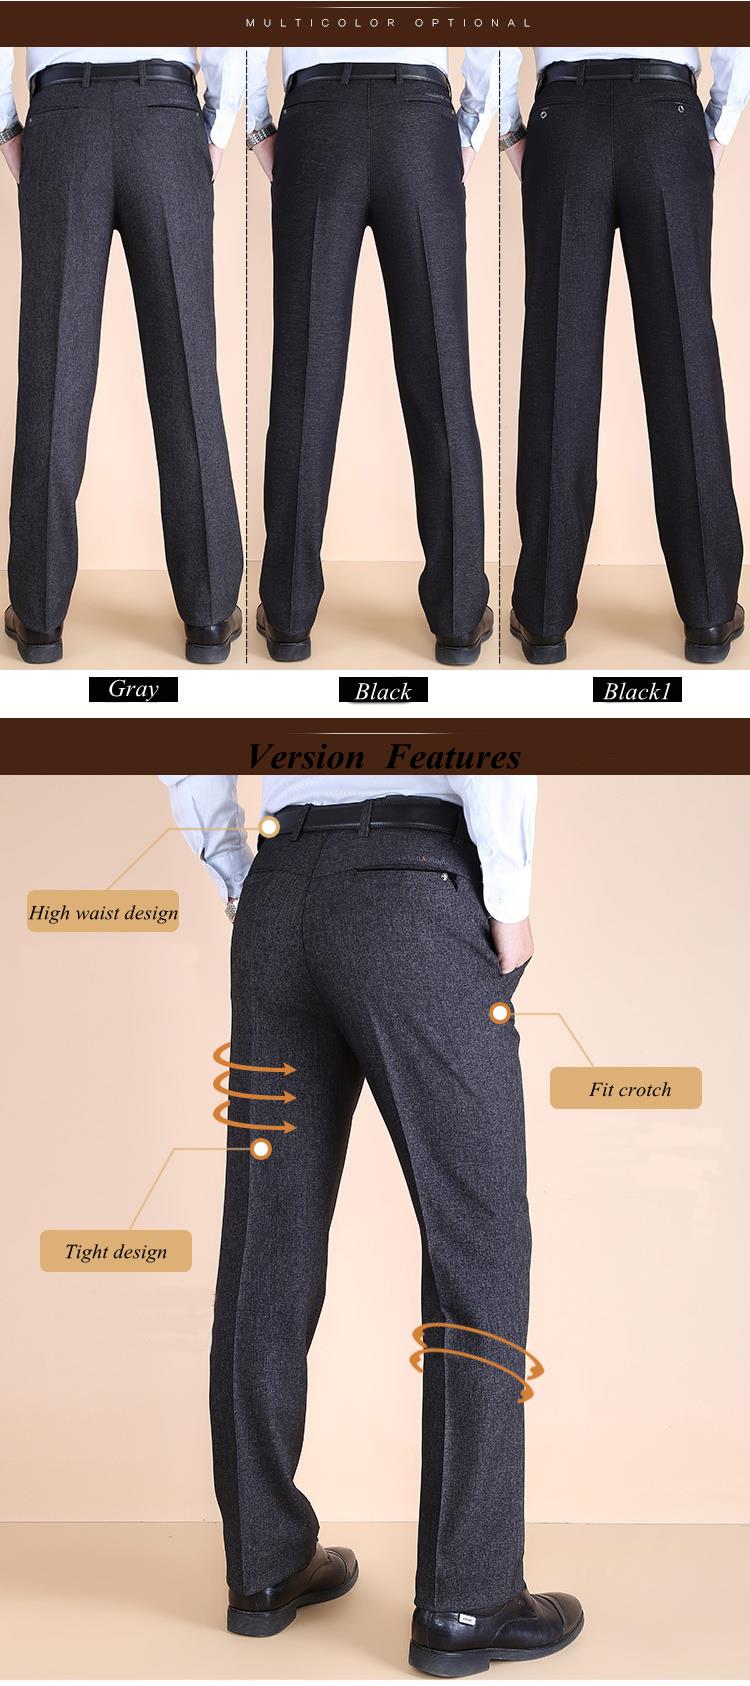 Autumn-Winter-Thick-Straight-Business-High-Waisted-Trousers-Mens-Casual-Suit-Pants-1256105